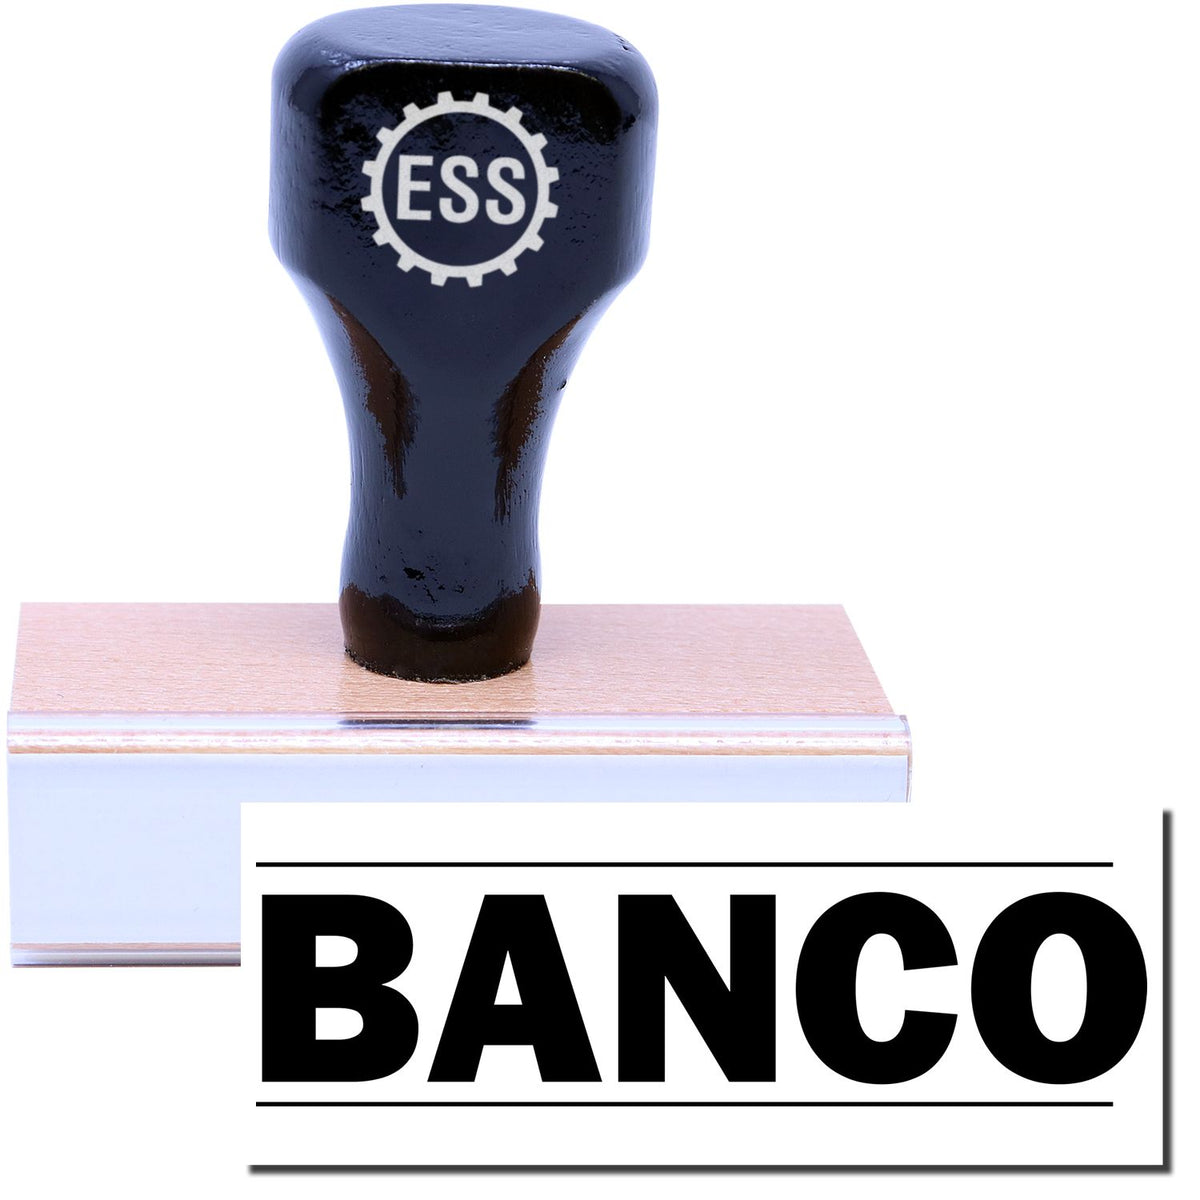 A stock office rubber stamp with a stamped image showing how the text &quot;BANCO&quot; in bold font with a line both above and below the text is displayed after stamping.